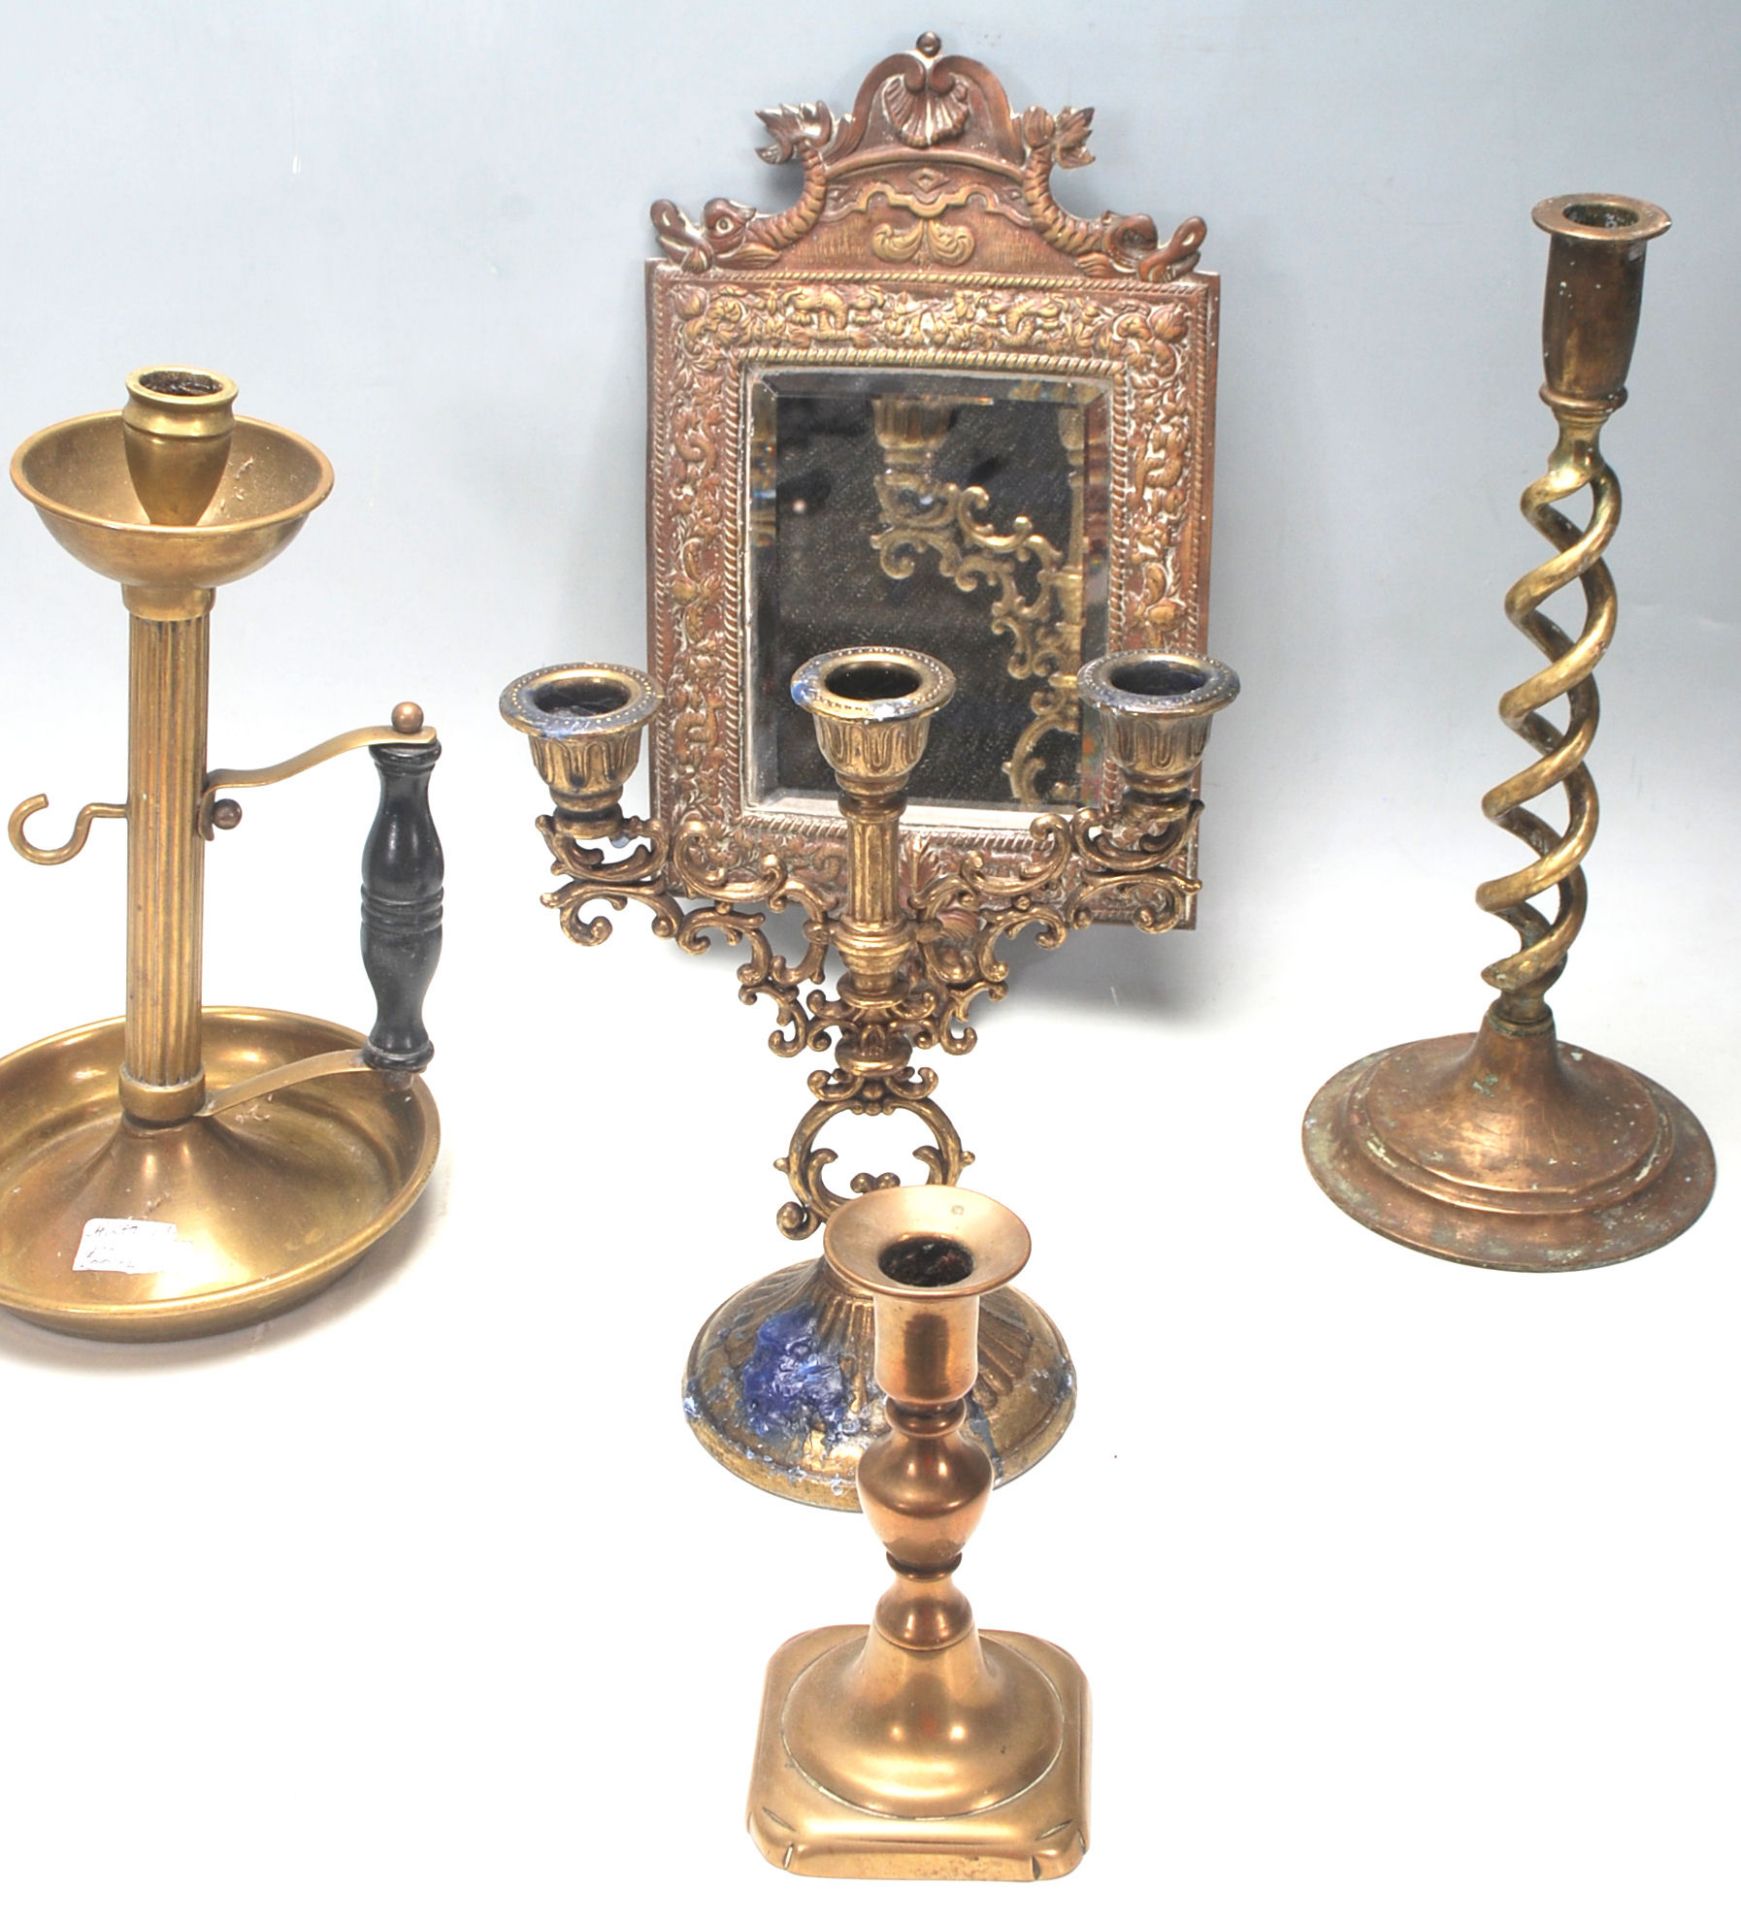 A GOOD COLLECTION OF 20TH CENTURY ANTIQUE BRASS